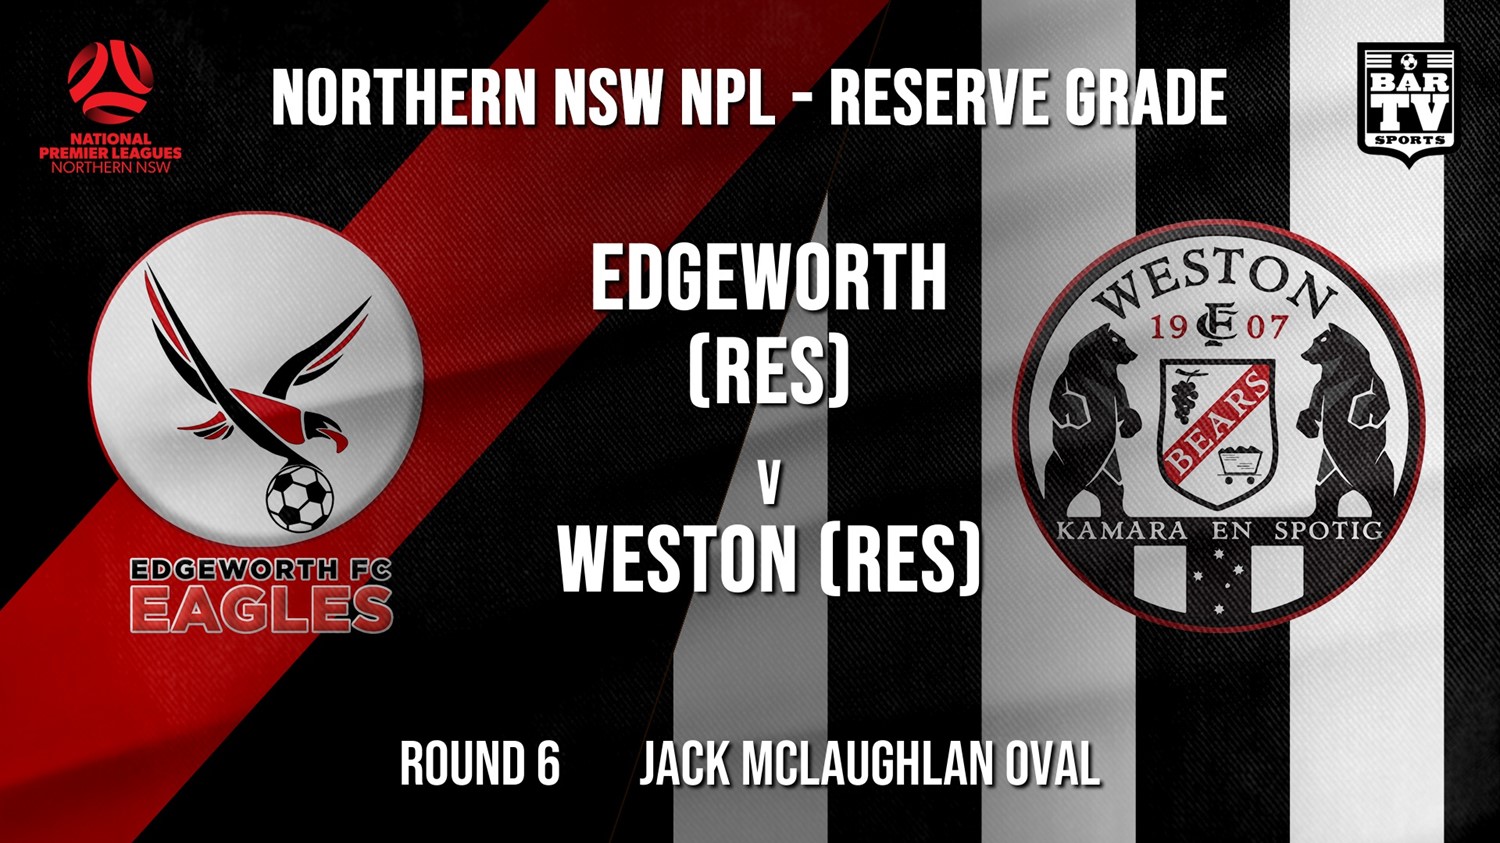 NPL NNSW RES Round 6 - Edgeworth Eagles (Res) v Weston Workers FC (Res) Minigame Slate Image